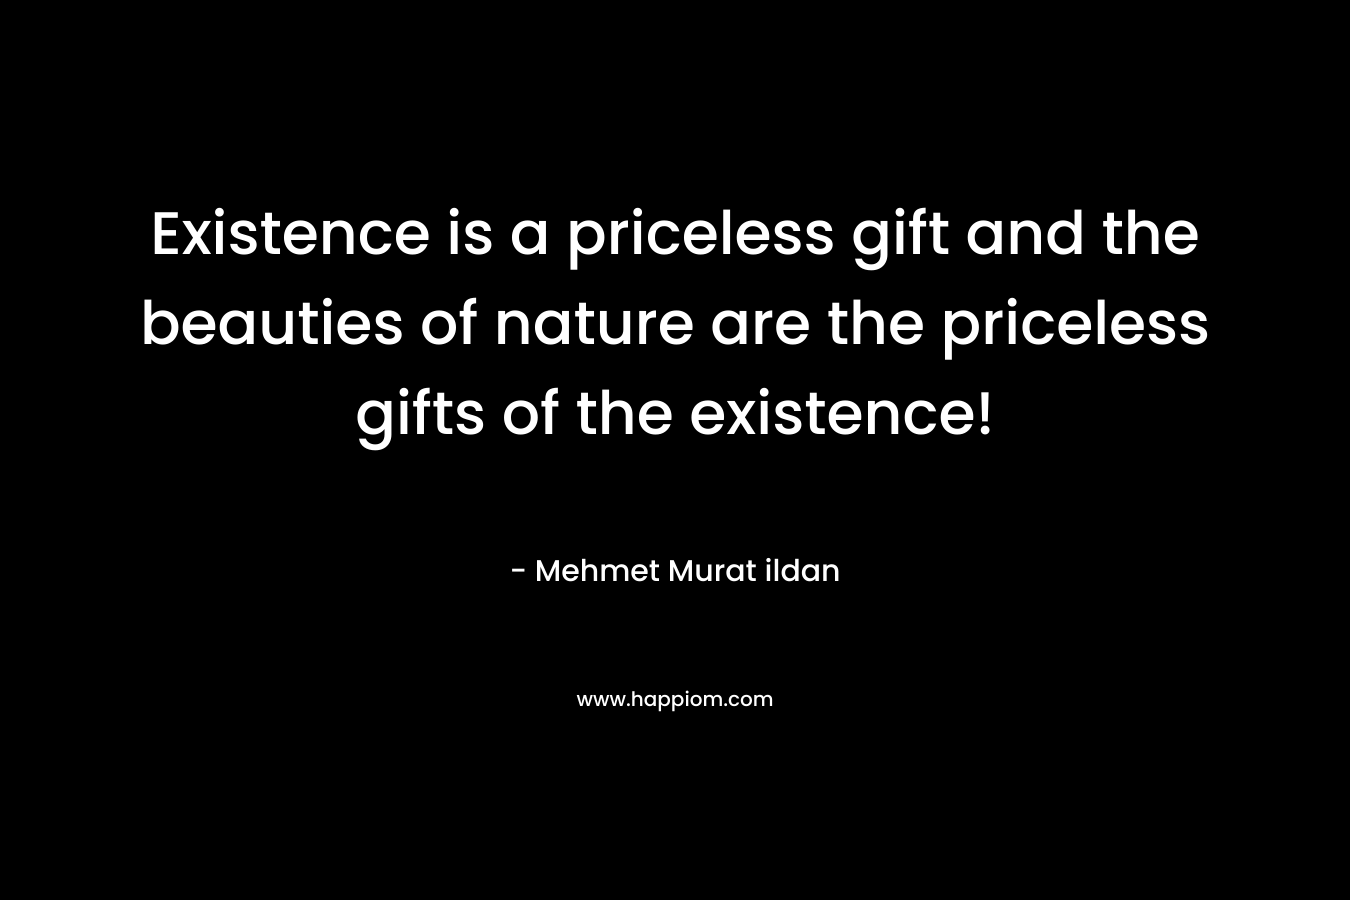 Existence is a priceless gift and the beauties of nature are the priceless gifts of the existence!